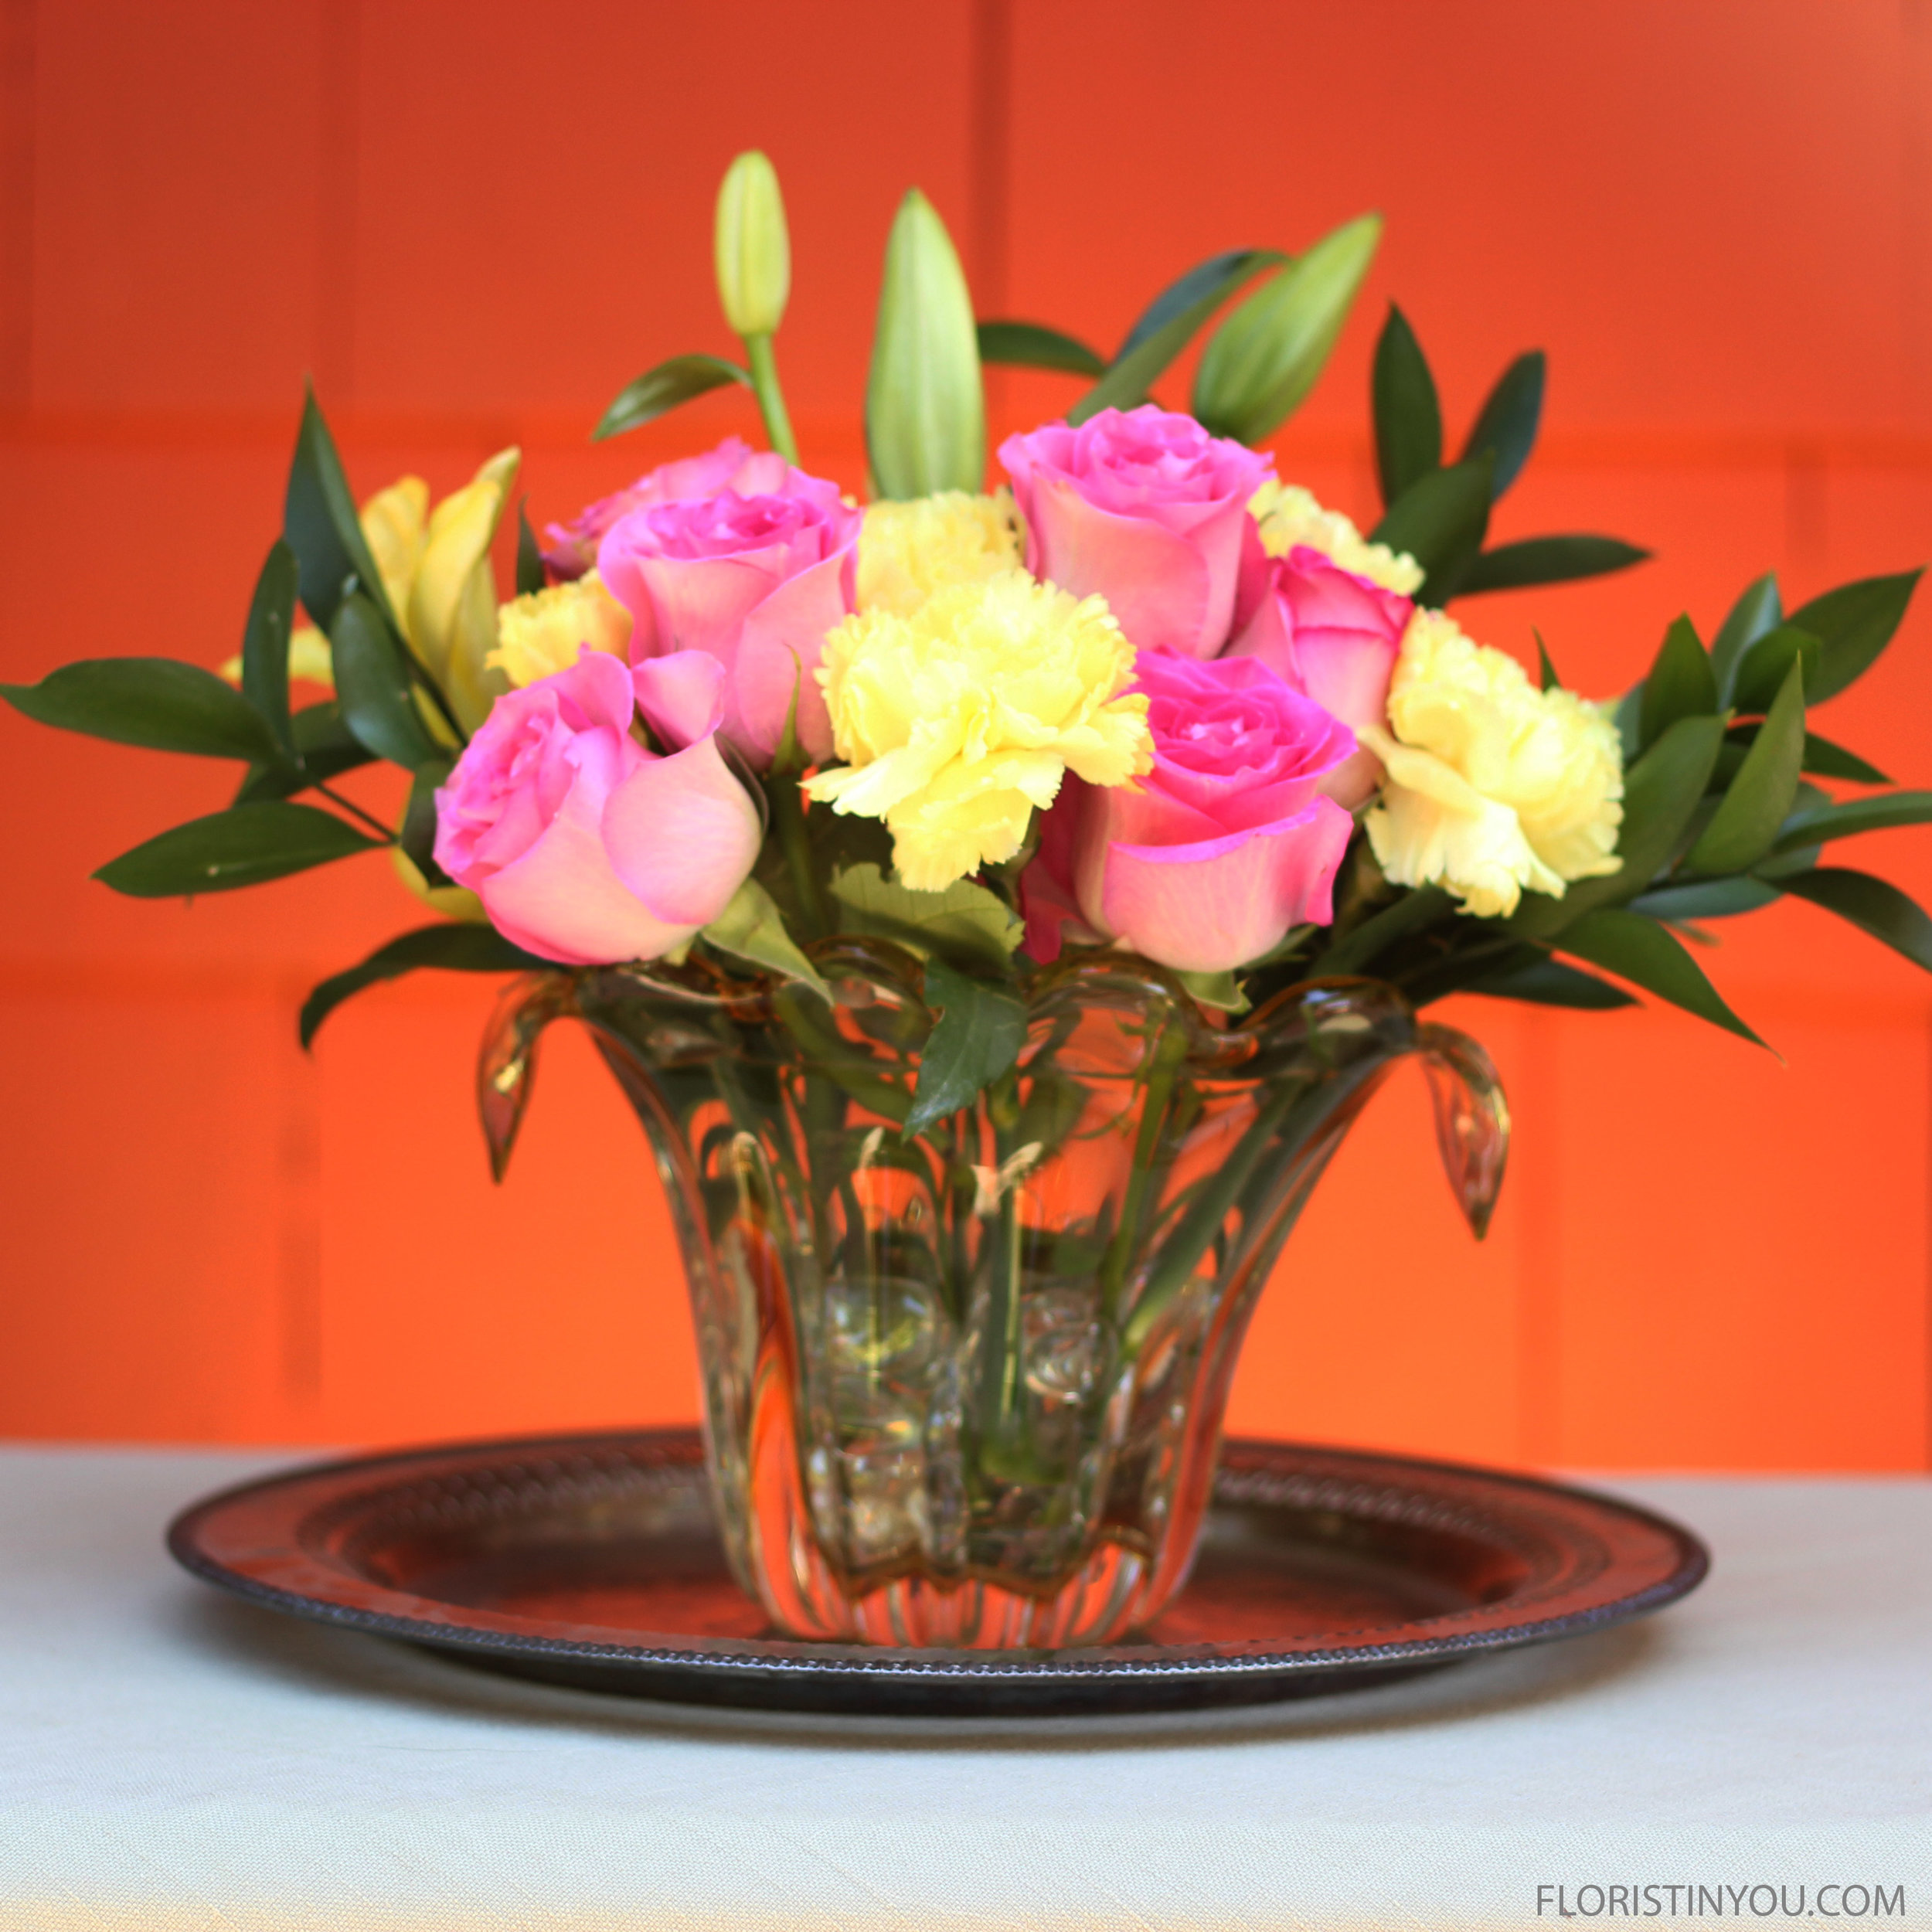 Arranging Flowers You Bought an Online in Your Vase